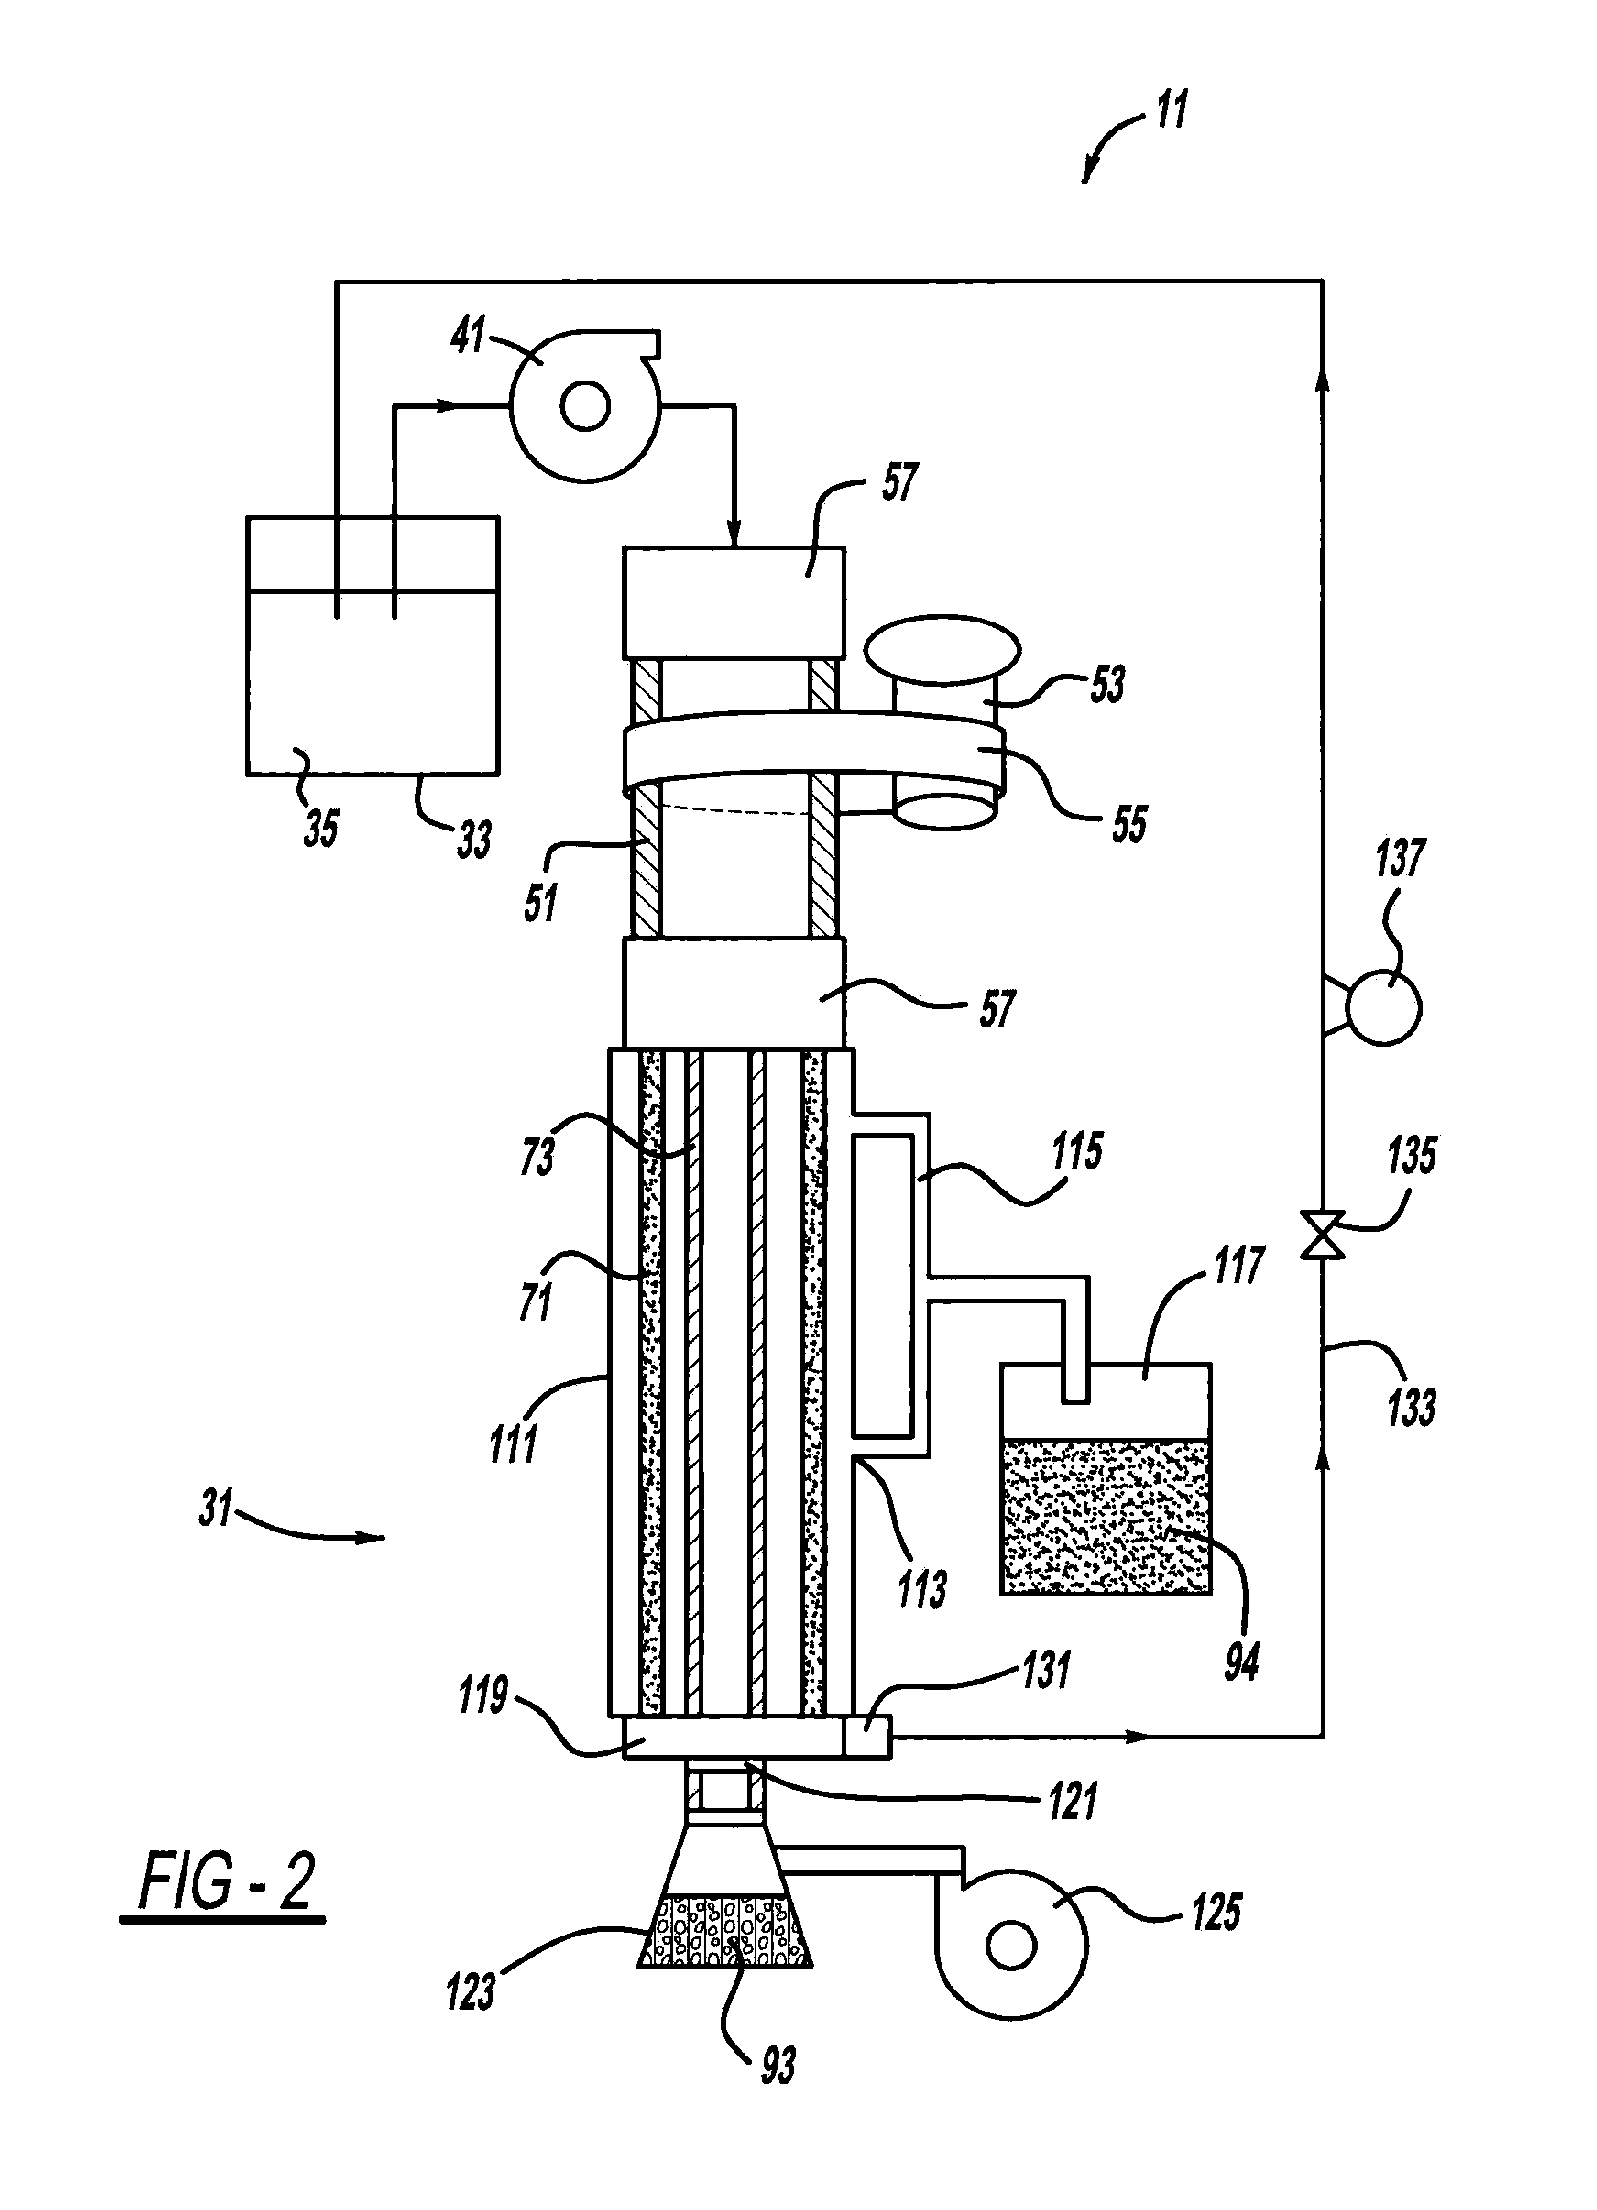 Water and oil separation system